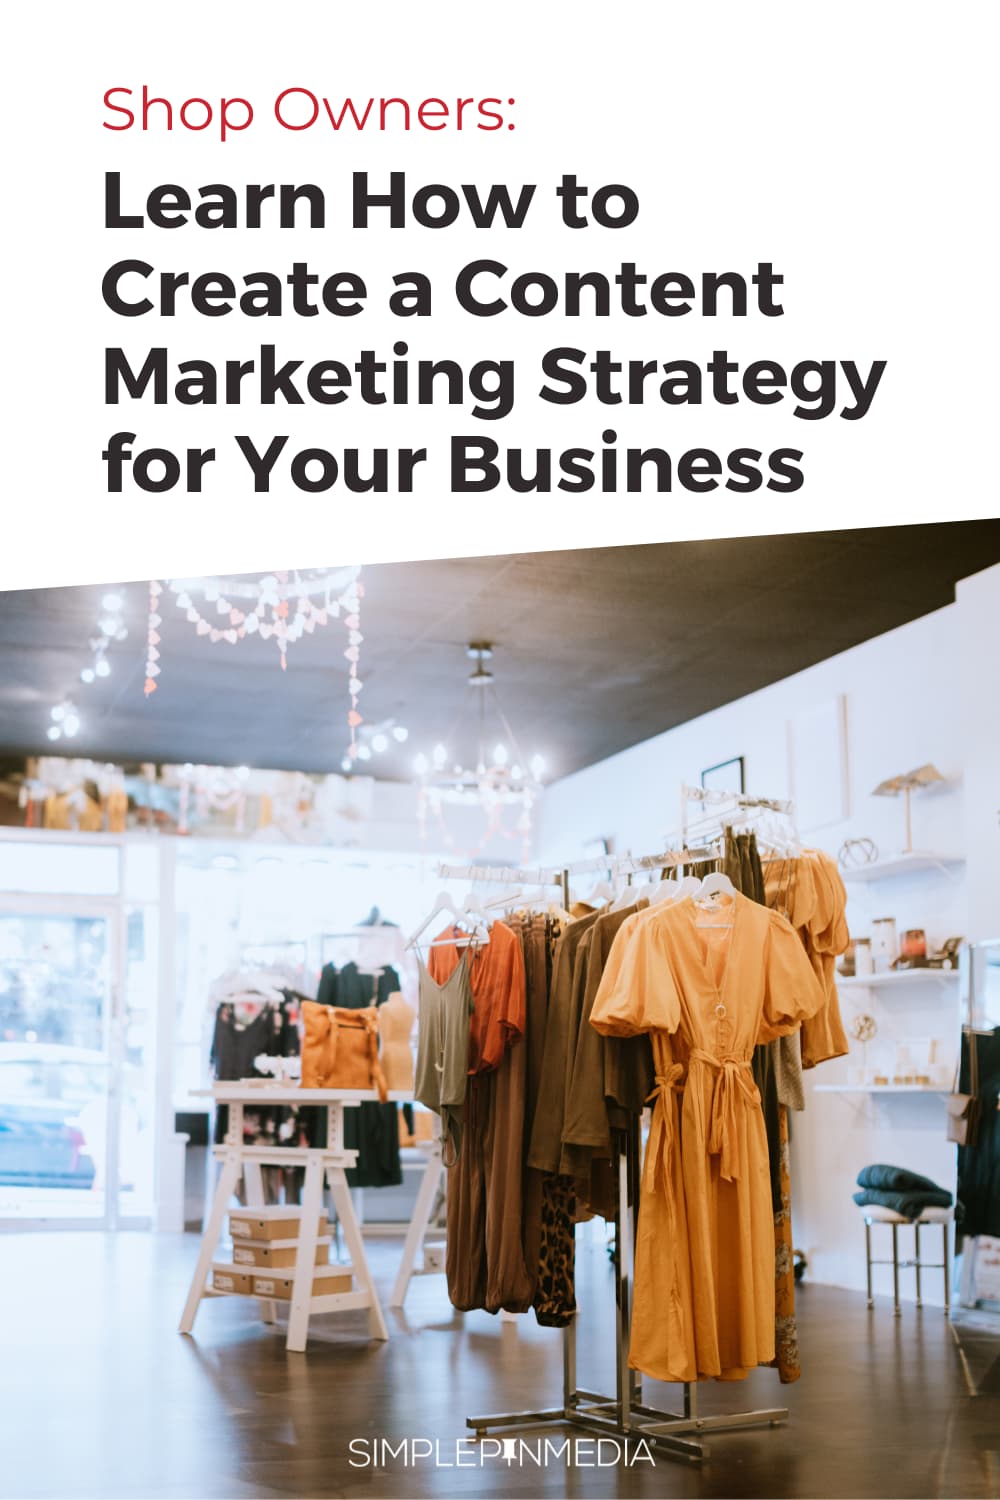 interior of of a clothing boutique - text "Show Owners" Learn How to Create a Content Marketing Strategy for Your Business".